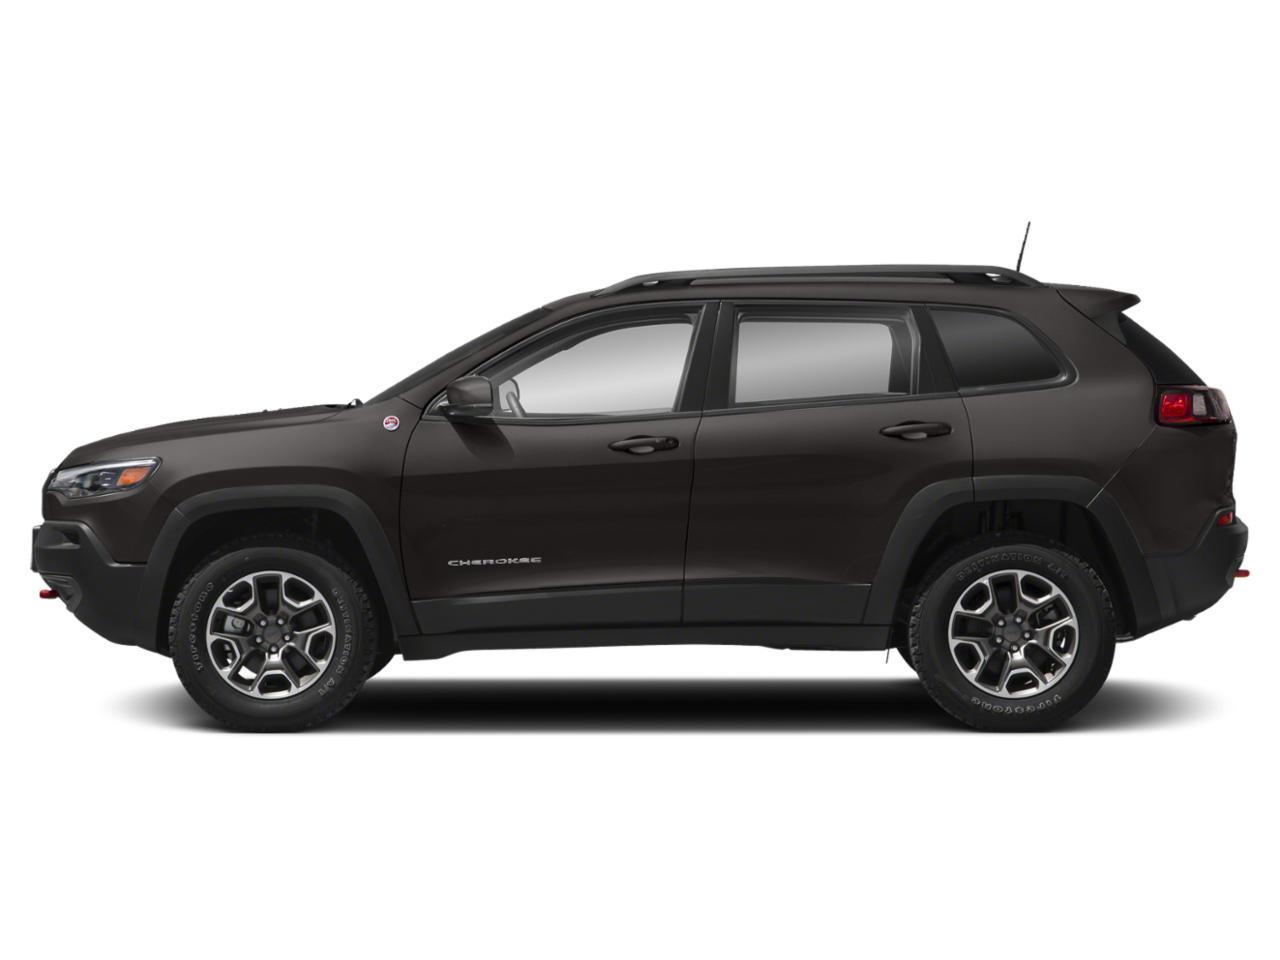 Used 2020 Jeep Cherokee Trailhawk with VIN 1C4PJMBX8LD564022 for sale in Worthington, Minnesota